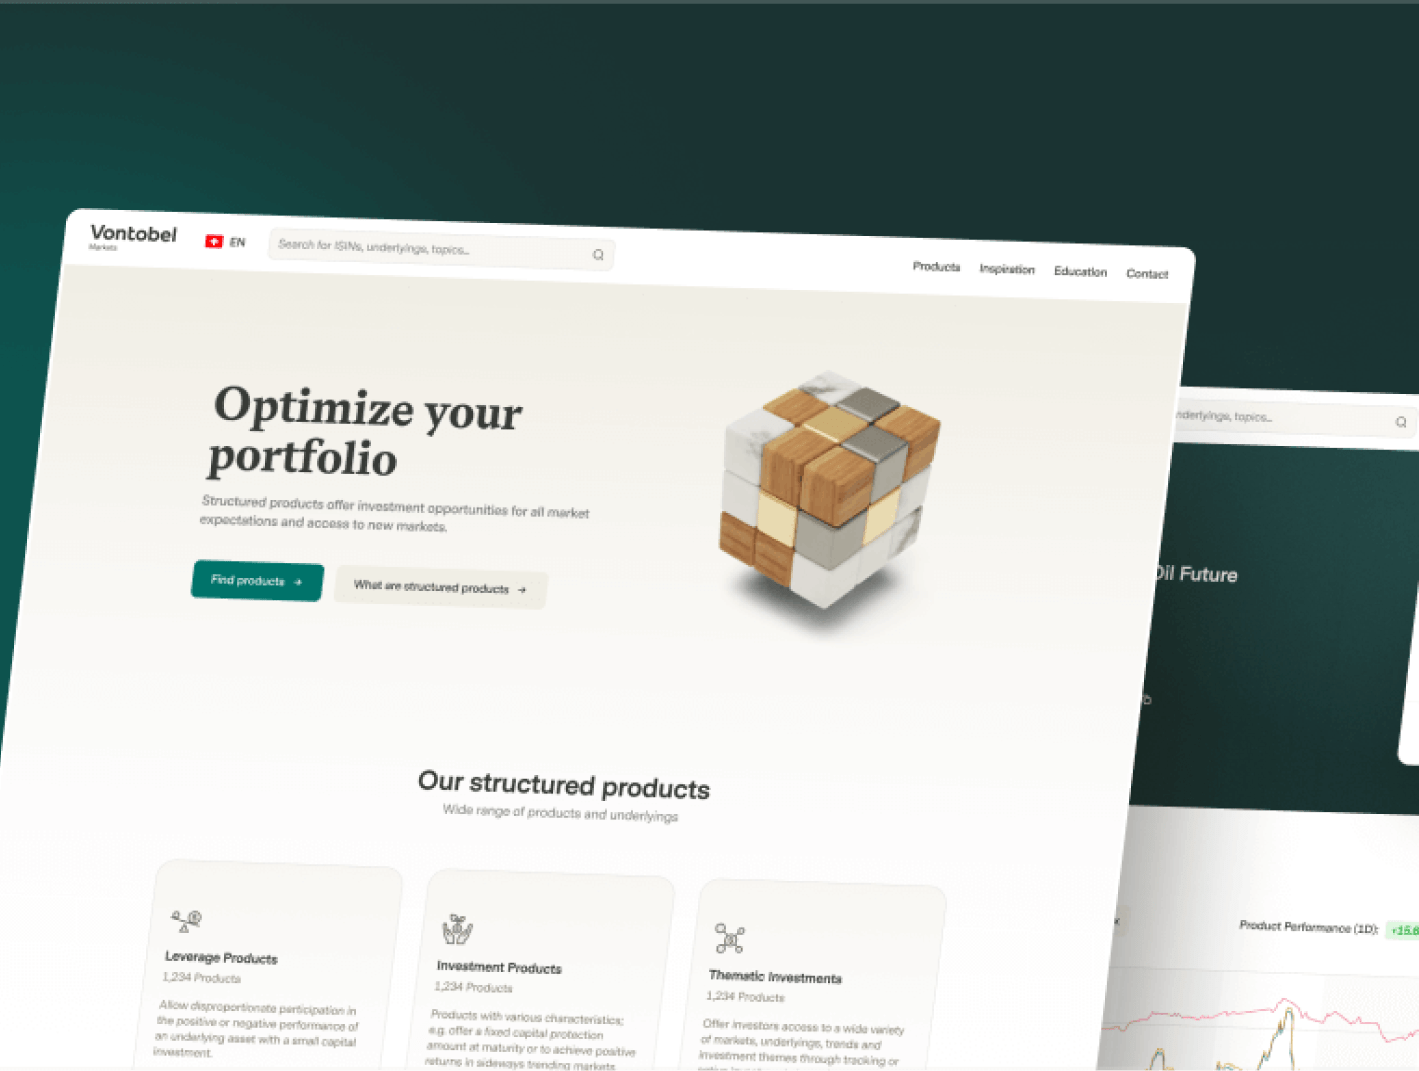 A preview of Vontobel's Markets Platform for structured products.